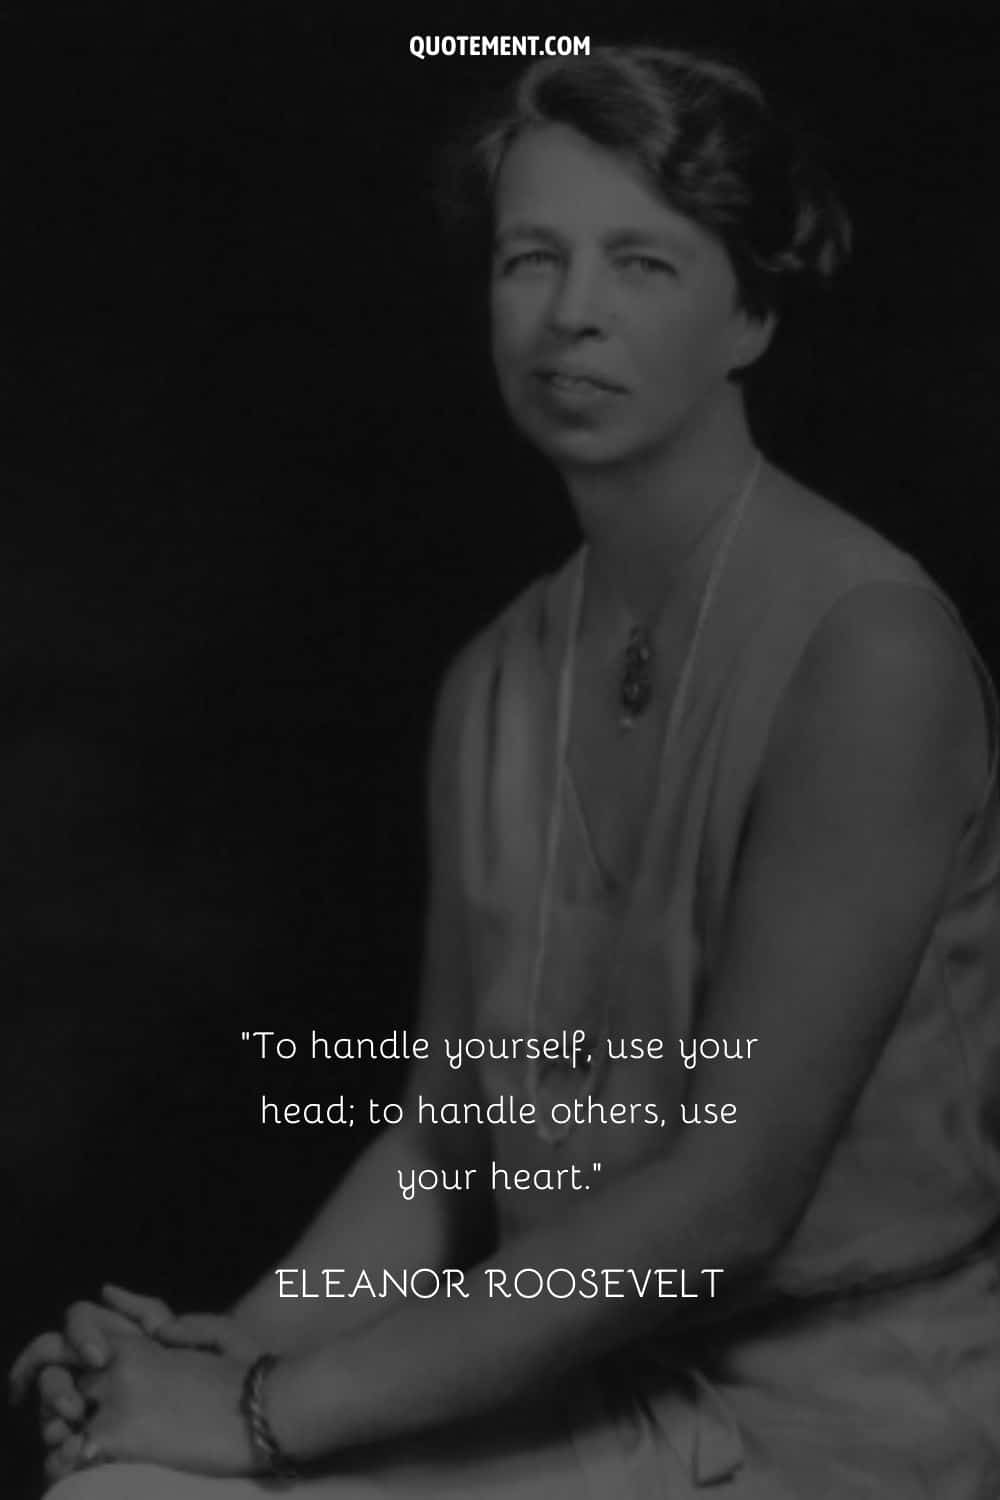 eleanor roosevelt quote on a background with her picture